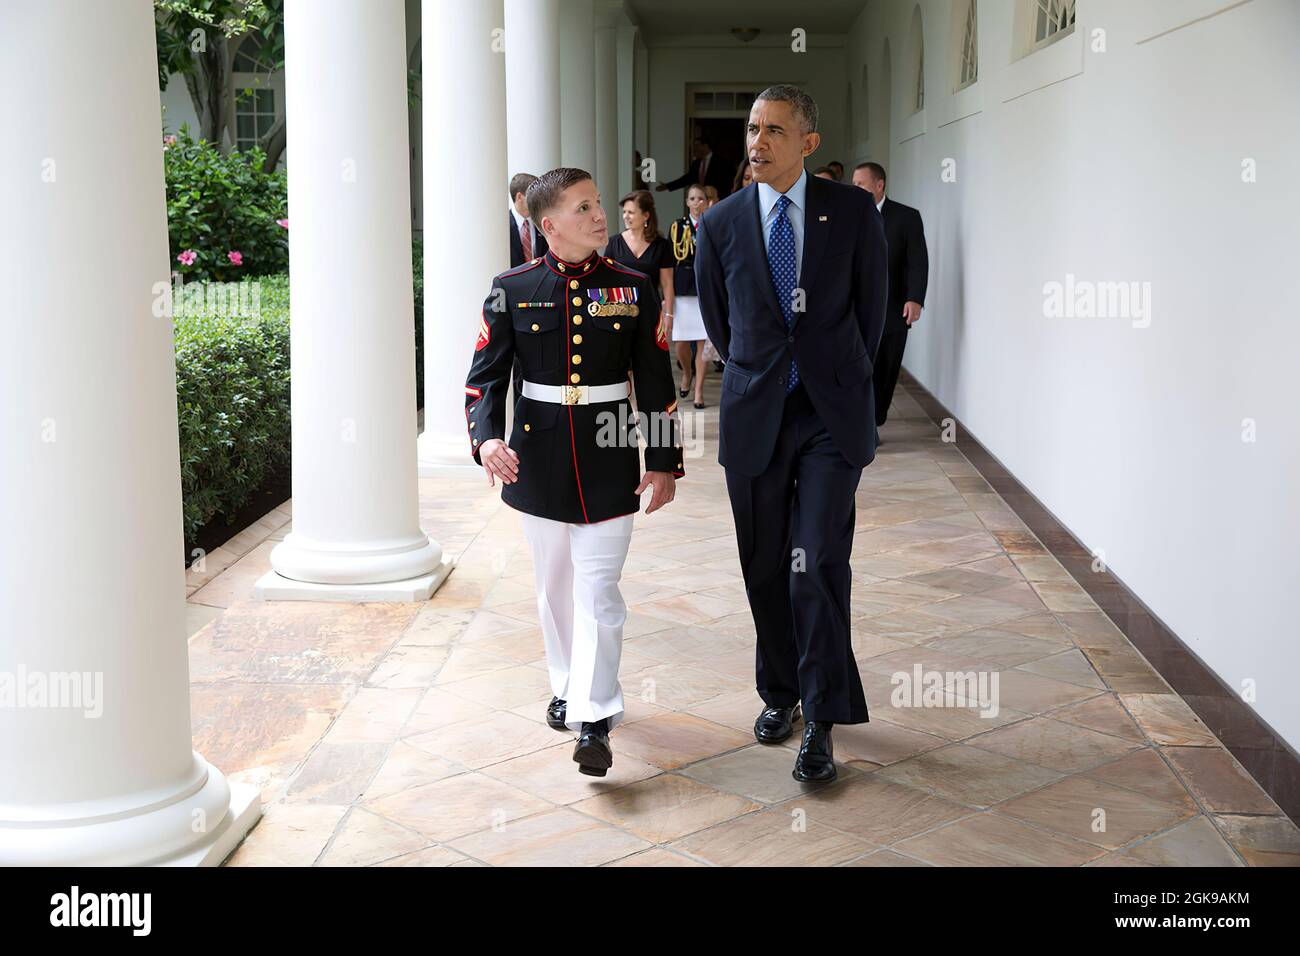 President Barack Obama walks on the Colonnade with Corporal William 'Kyle' Carpenter, U.S. Marine Corps (Ret.) en route to a Medal of Honor ceremony in the East Room of the White House, June 19, 2014. (Official White House Photo by Pete Souza) This official White House photograph is being made available only for publication by news organizations and/or for personal use printing by the subject(s) of the photograph. The photograph may not be manipulated in any way and may not be used in commercial or political materials, advertisements, emails, products, promotions that in any way suggests appro Stock Photo